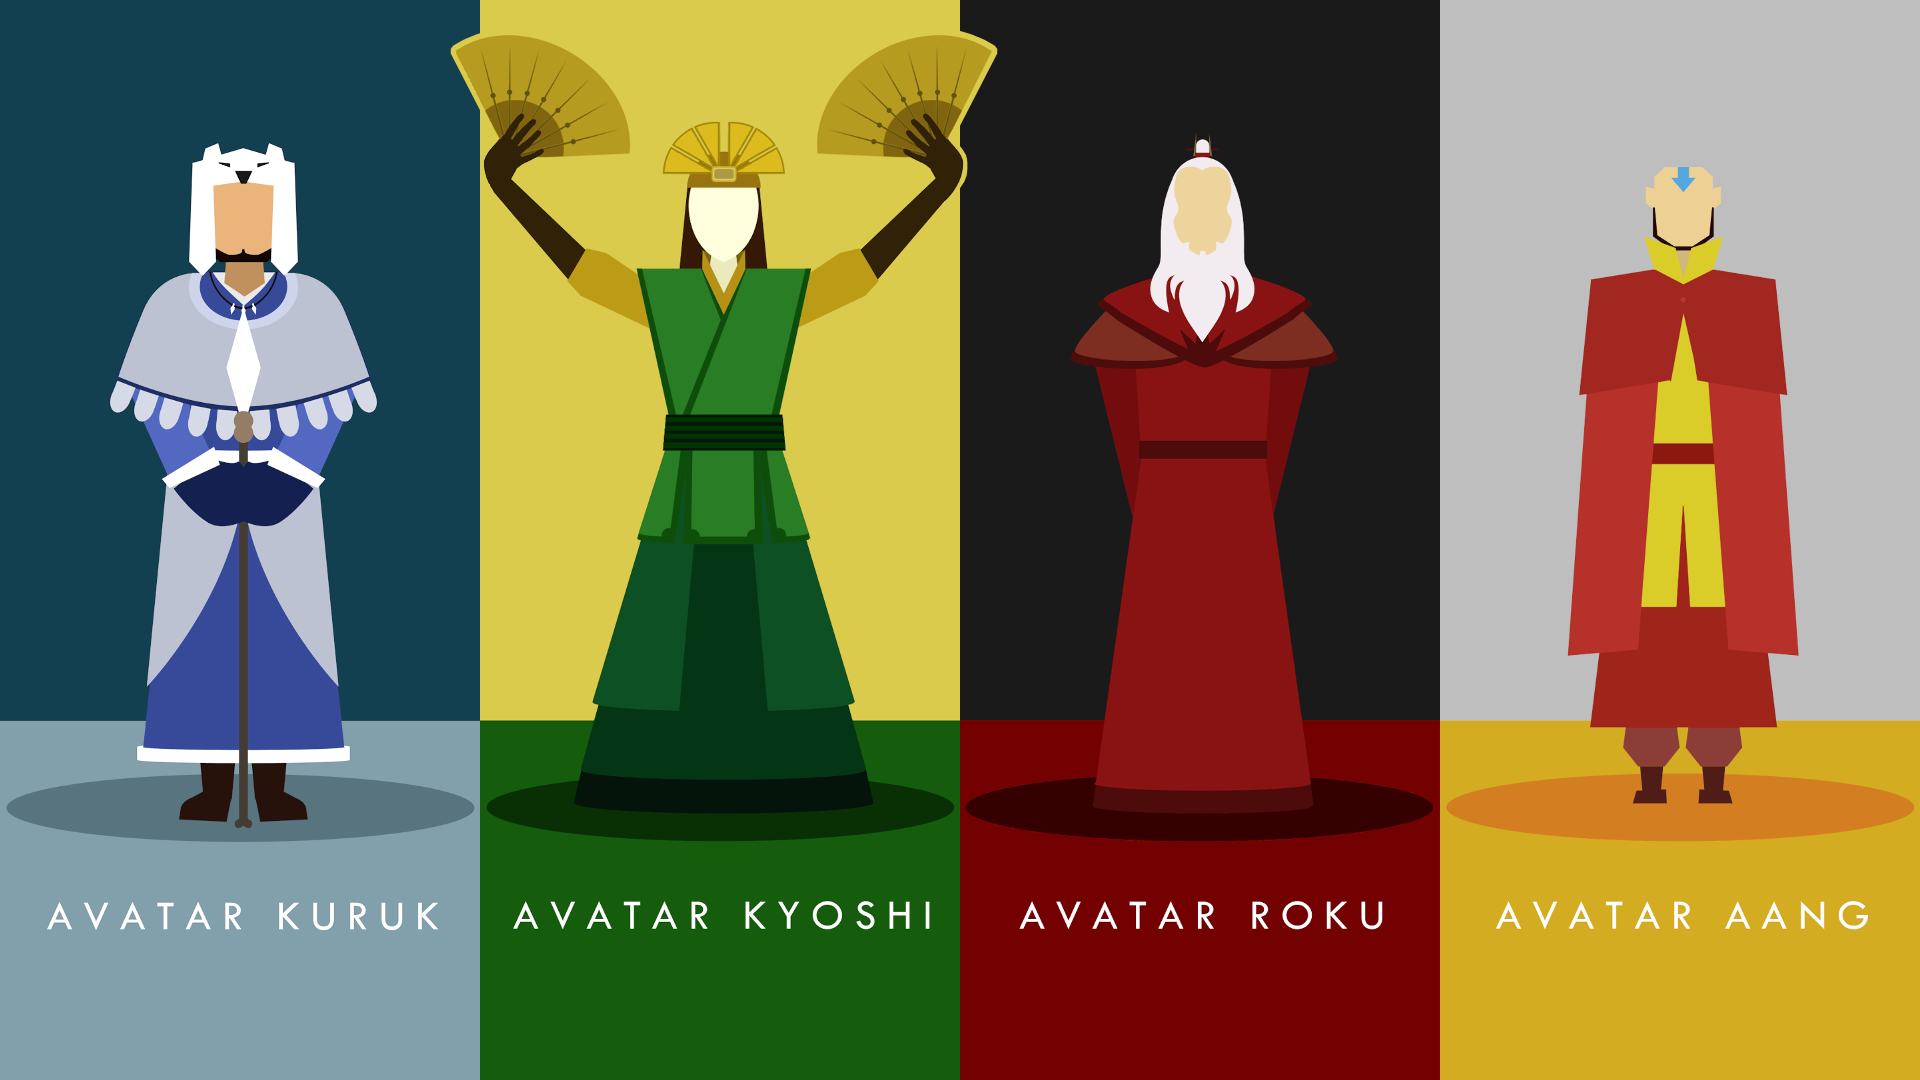 The Elements werent the only thing Avatar Kuruk was a master at bending    rTheLastAirbender